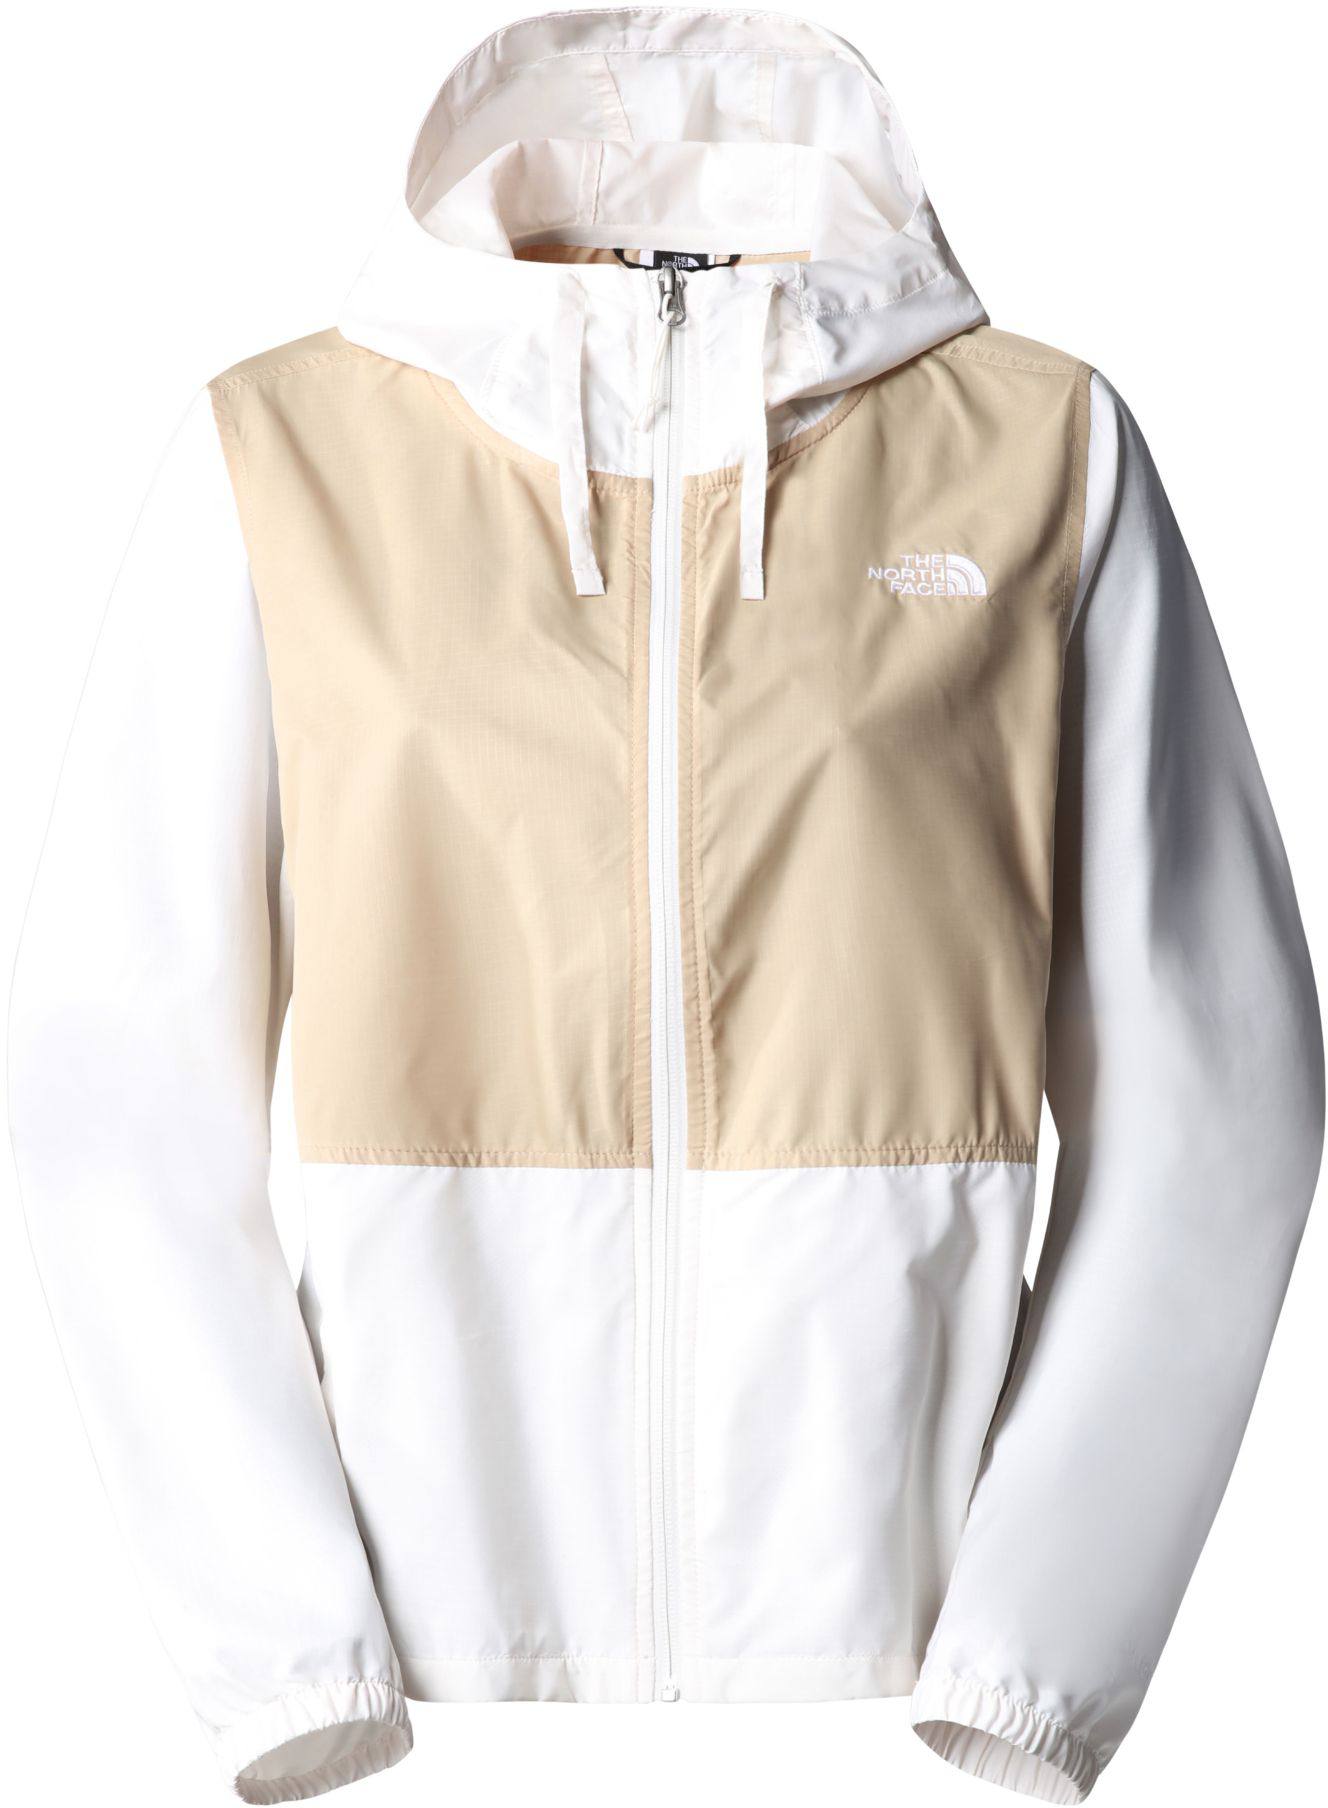 The North Face Women’s Cyclone 3 Jacket